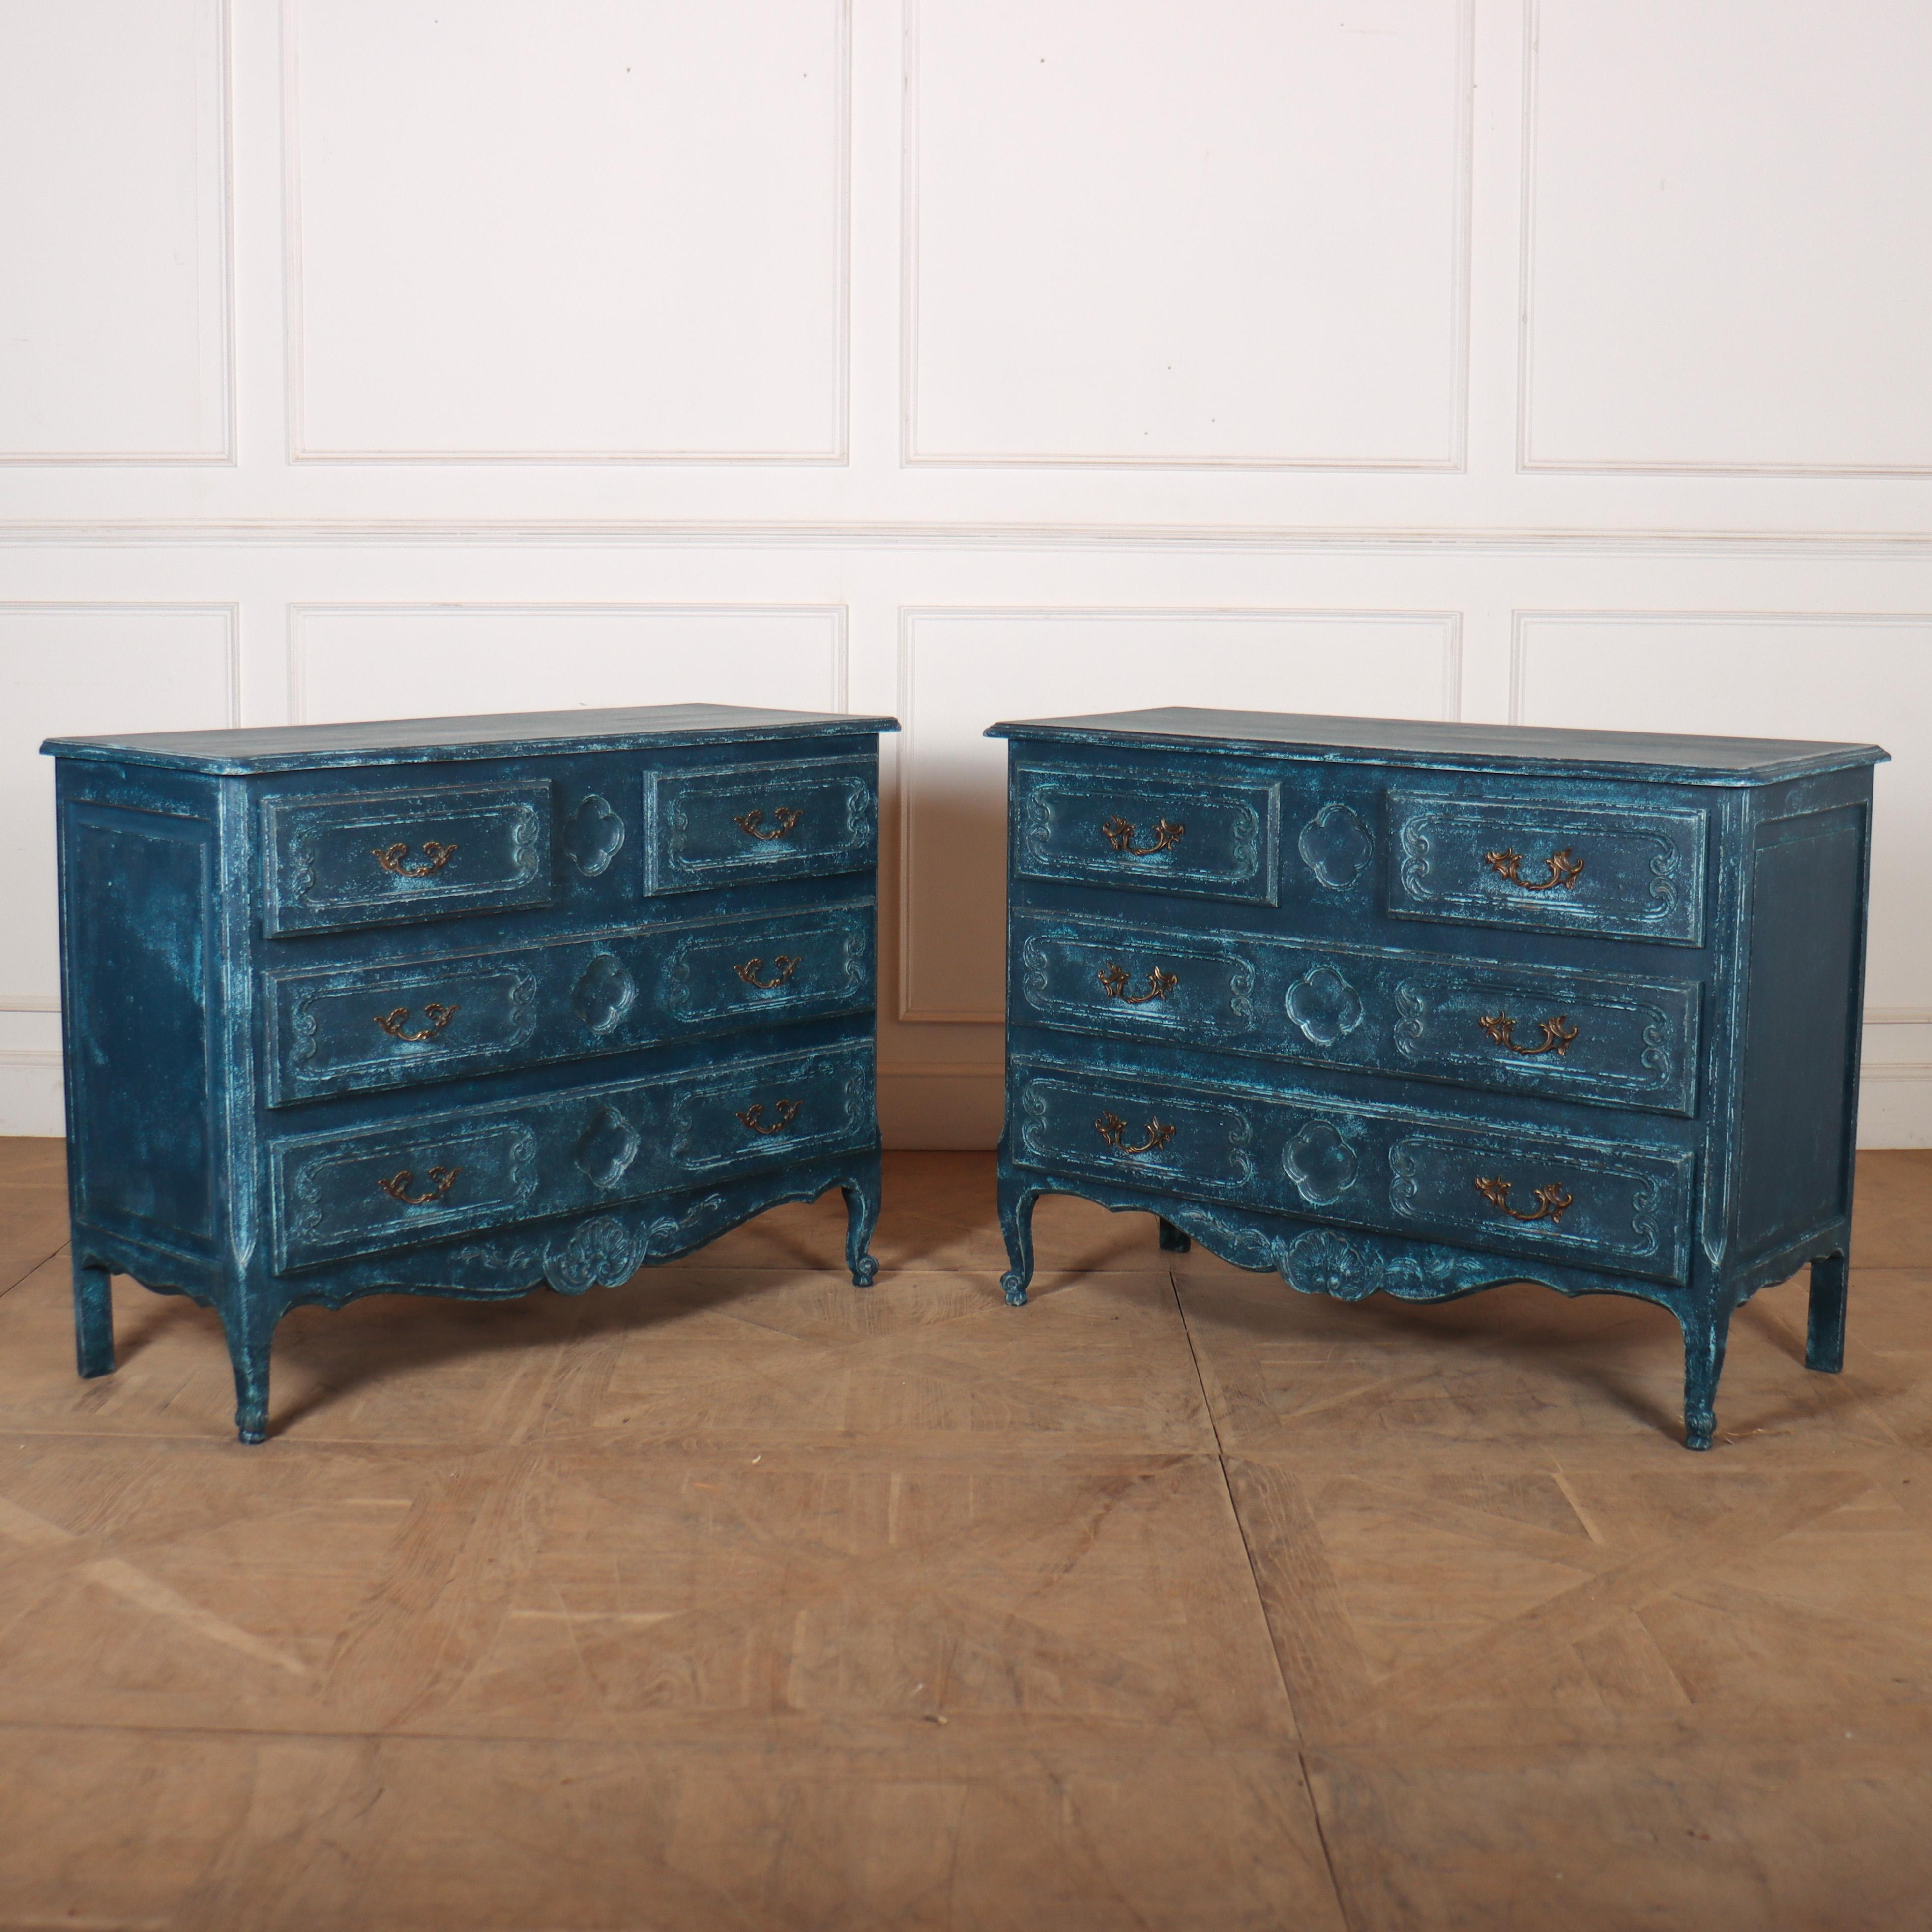 Pair of early 20th C French painted oak commodes. 1930.

Reference: 8312

Dimensions
48.5 inches (123 cms) Wide
20 inches (51 cms) Deep
35.5 inches (90 cms) High